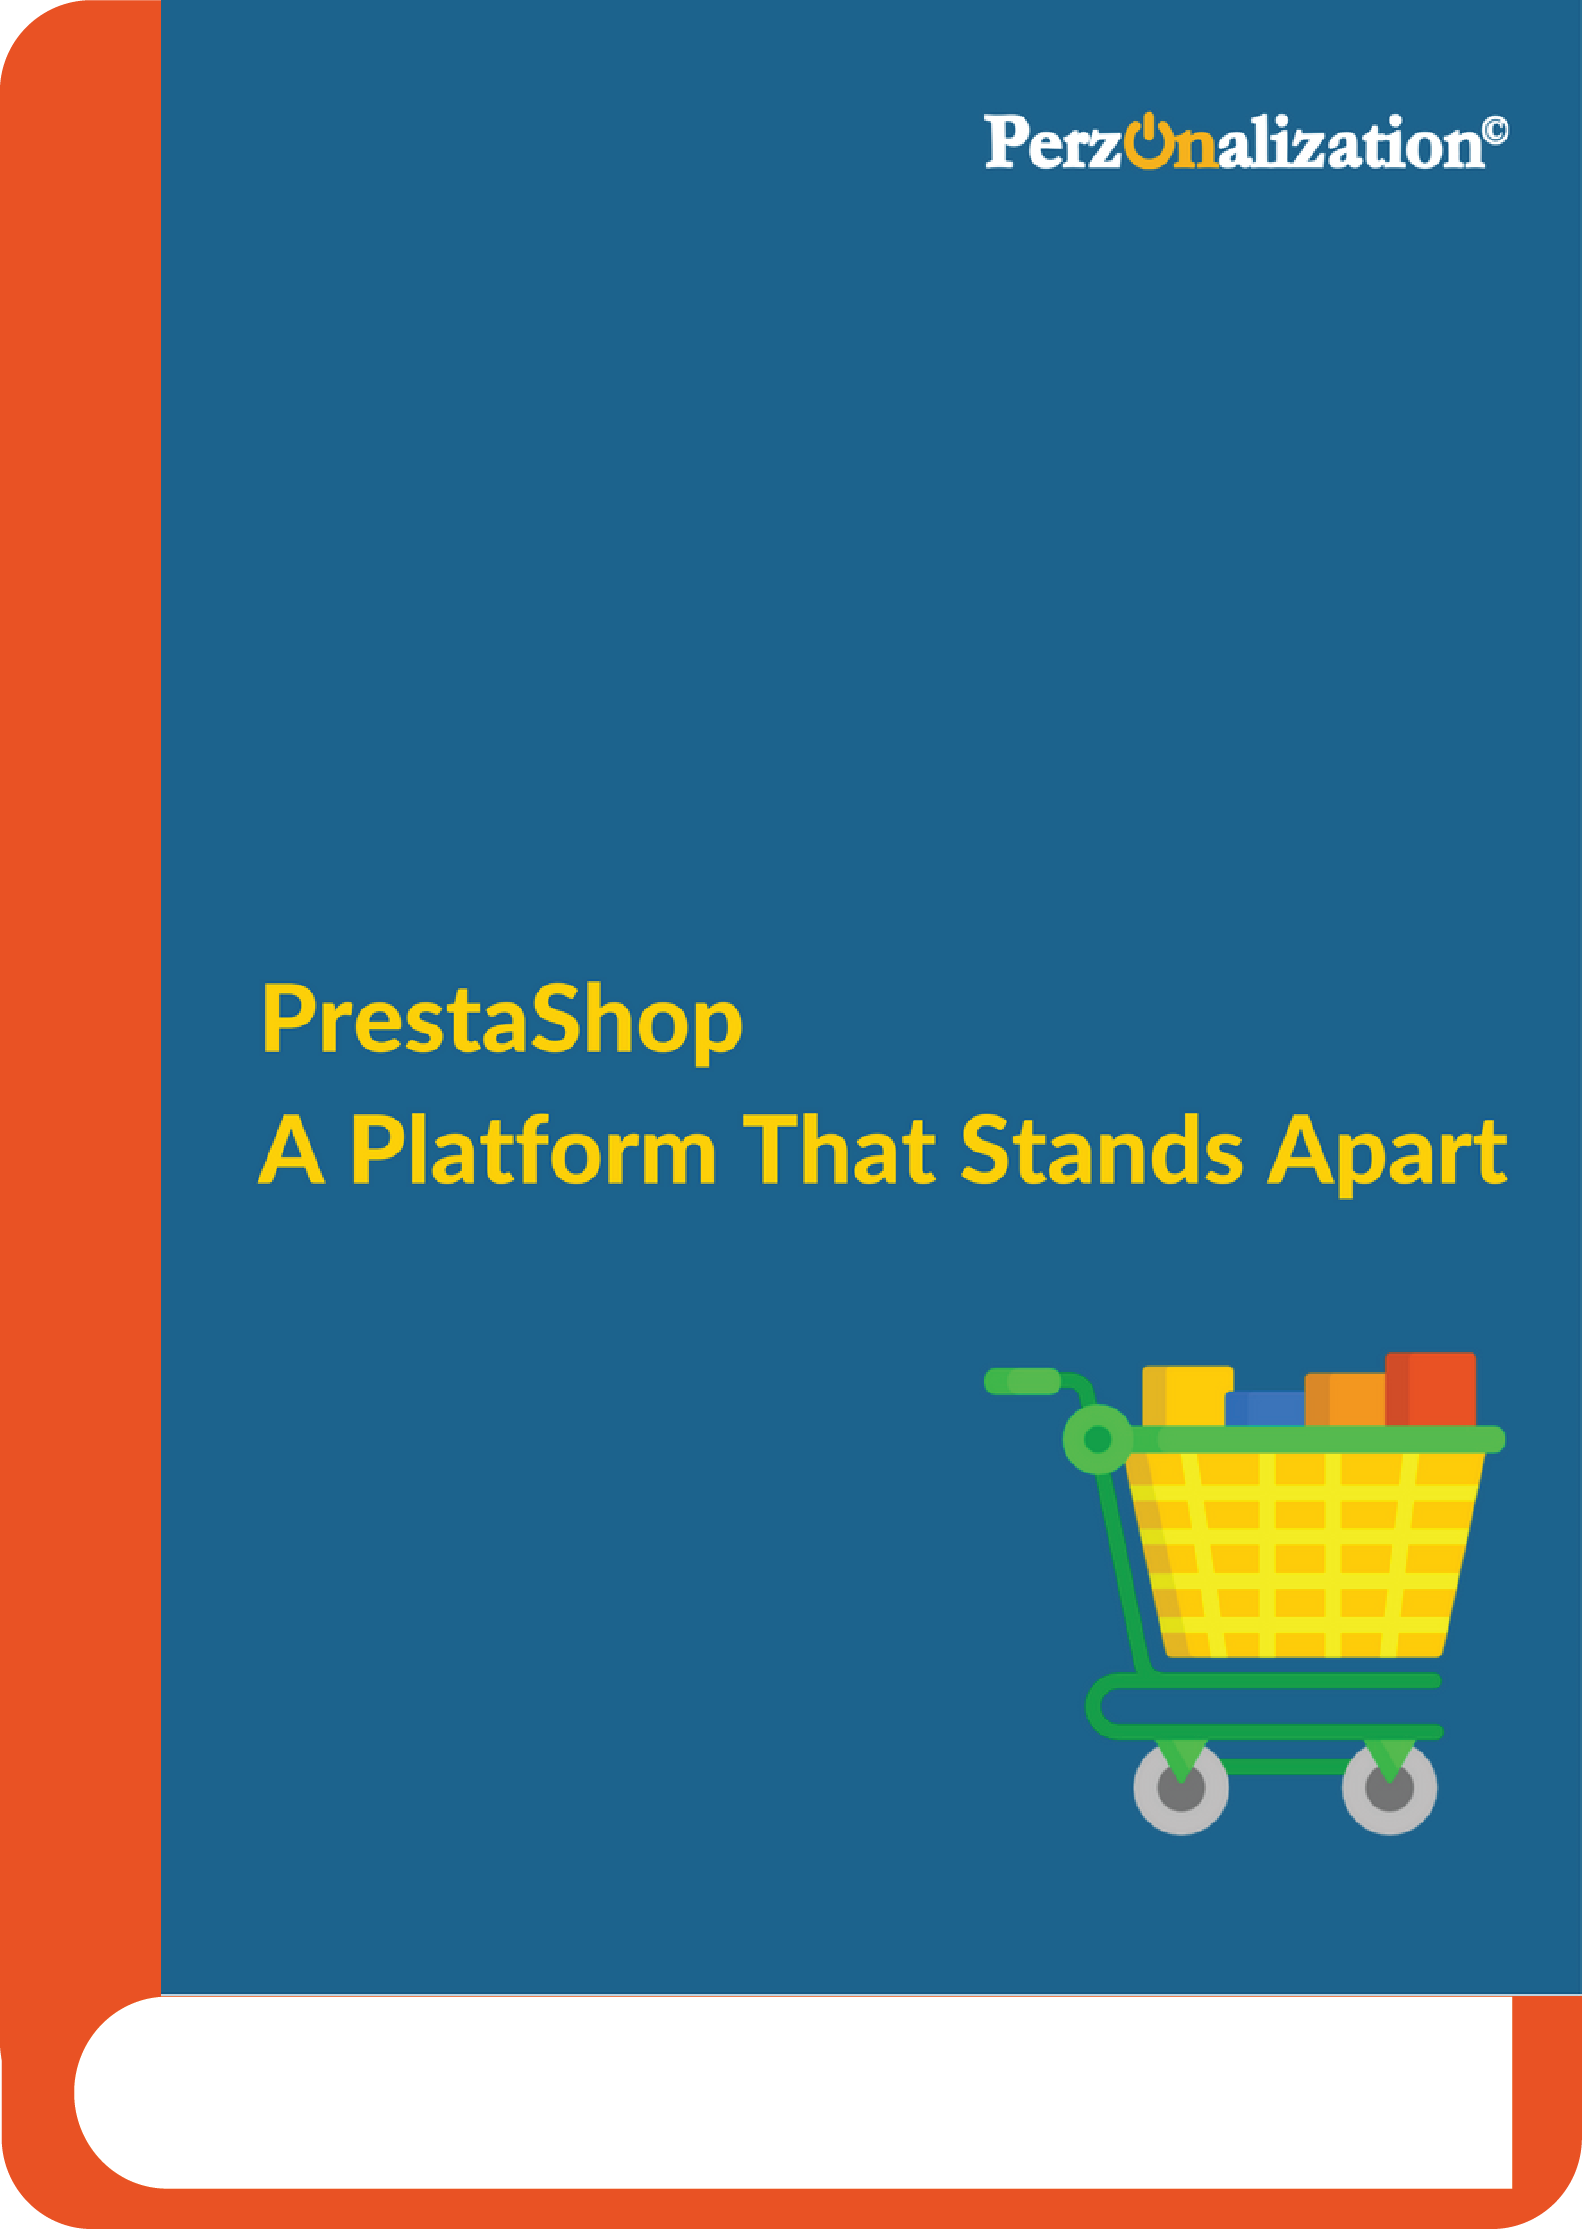 Trying to decide which eCommerce platform to choose? Learn about the popular eCommerce platform PrestaShop and its modules in this free eBook.